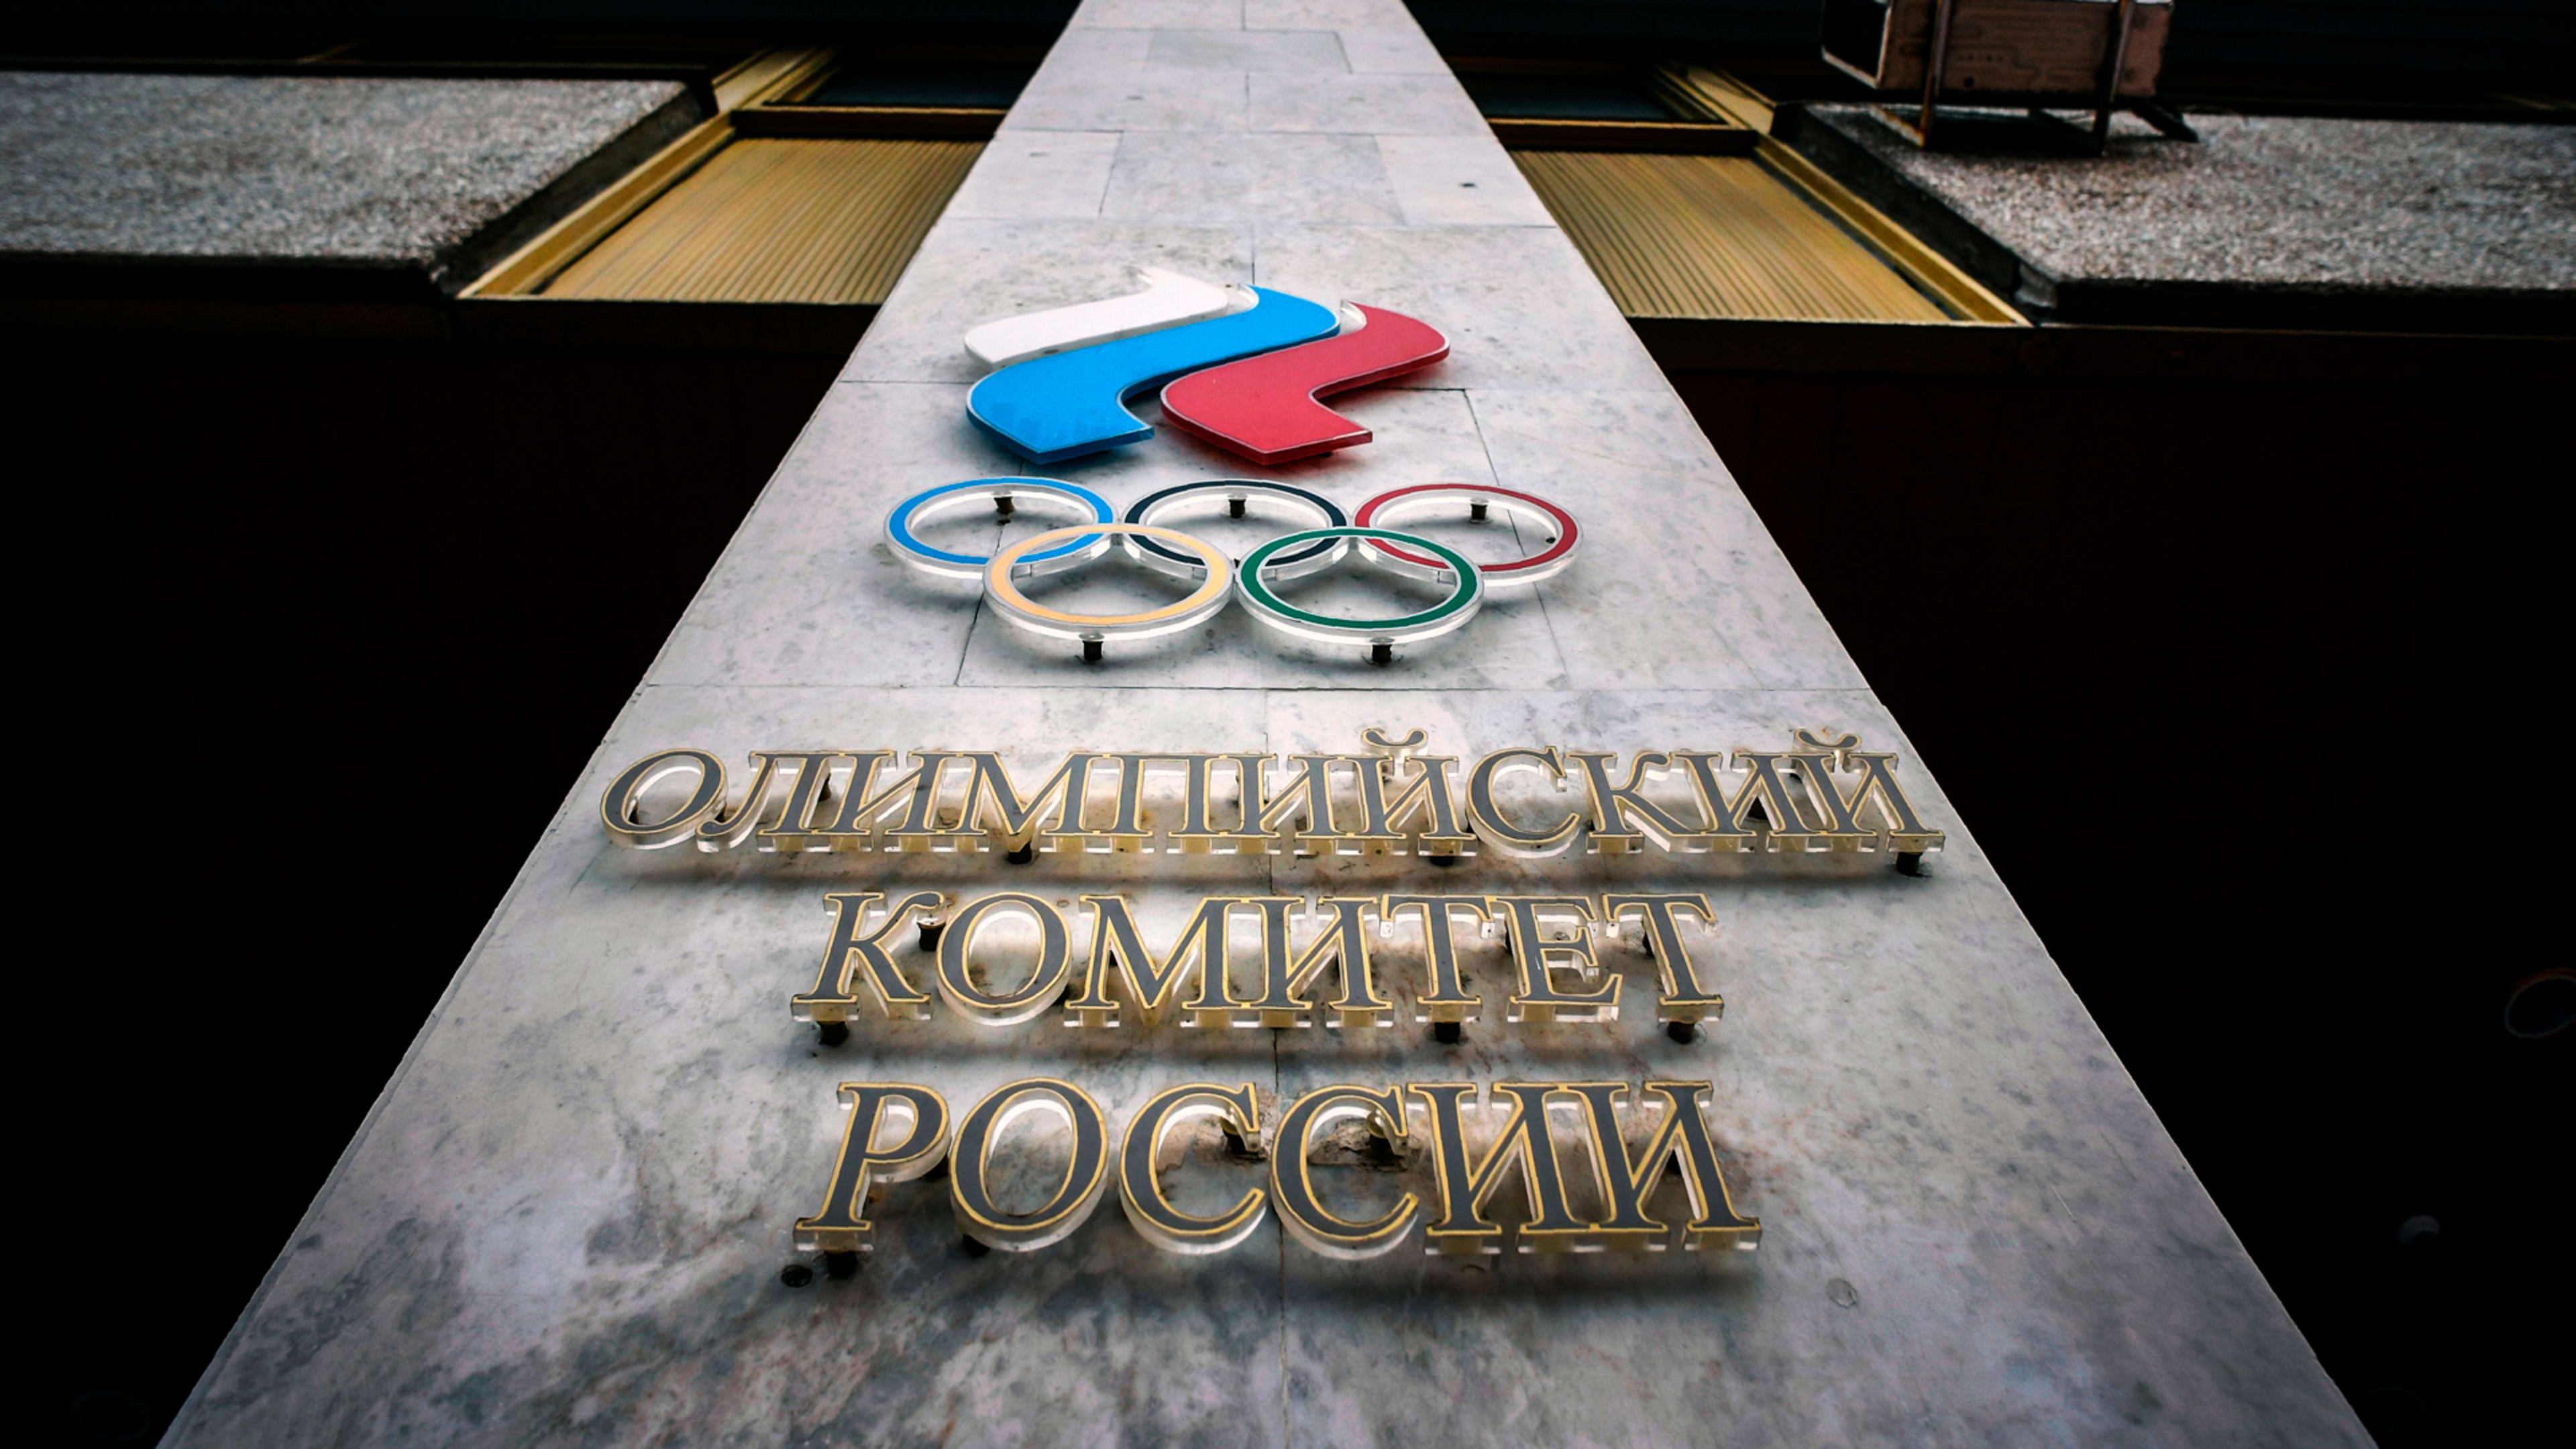 Russia’s impressive commitment to doping and tampering just got it banned from the 2020 Olympics